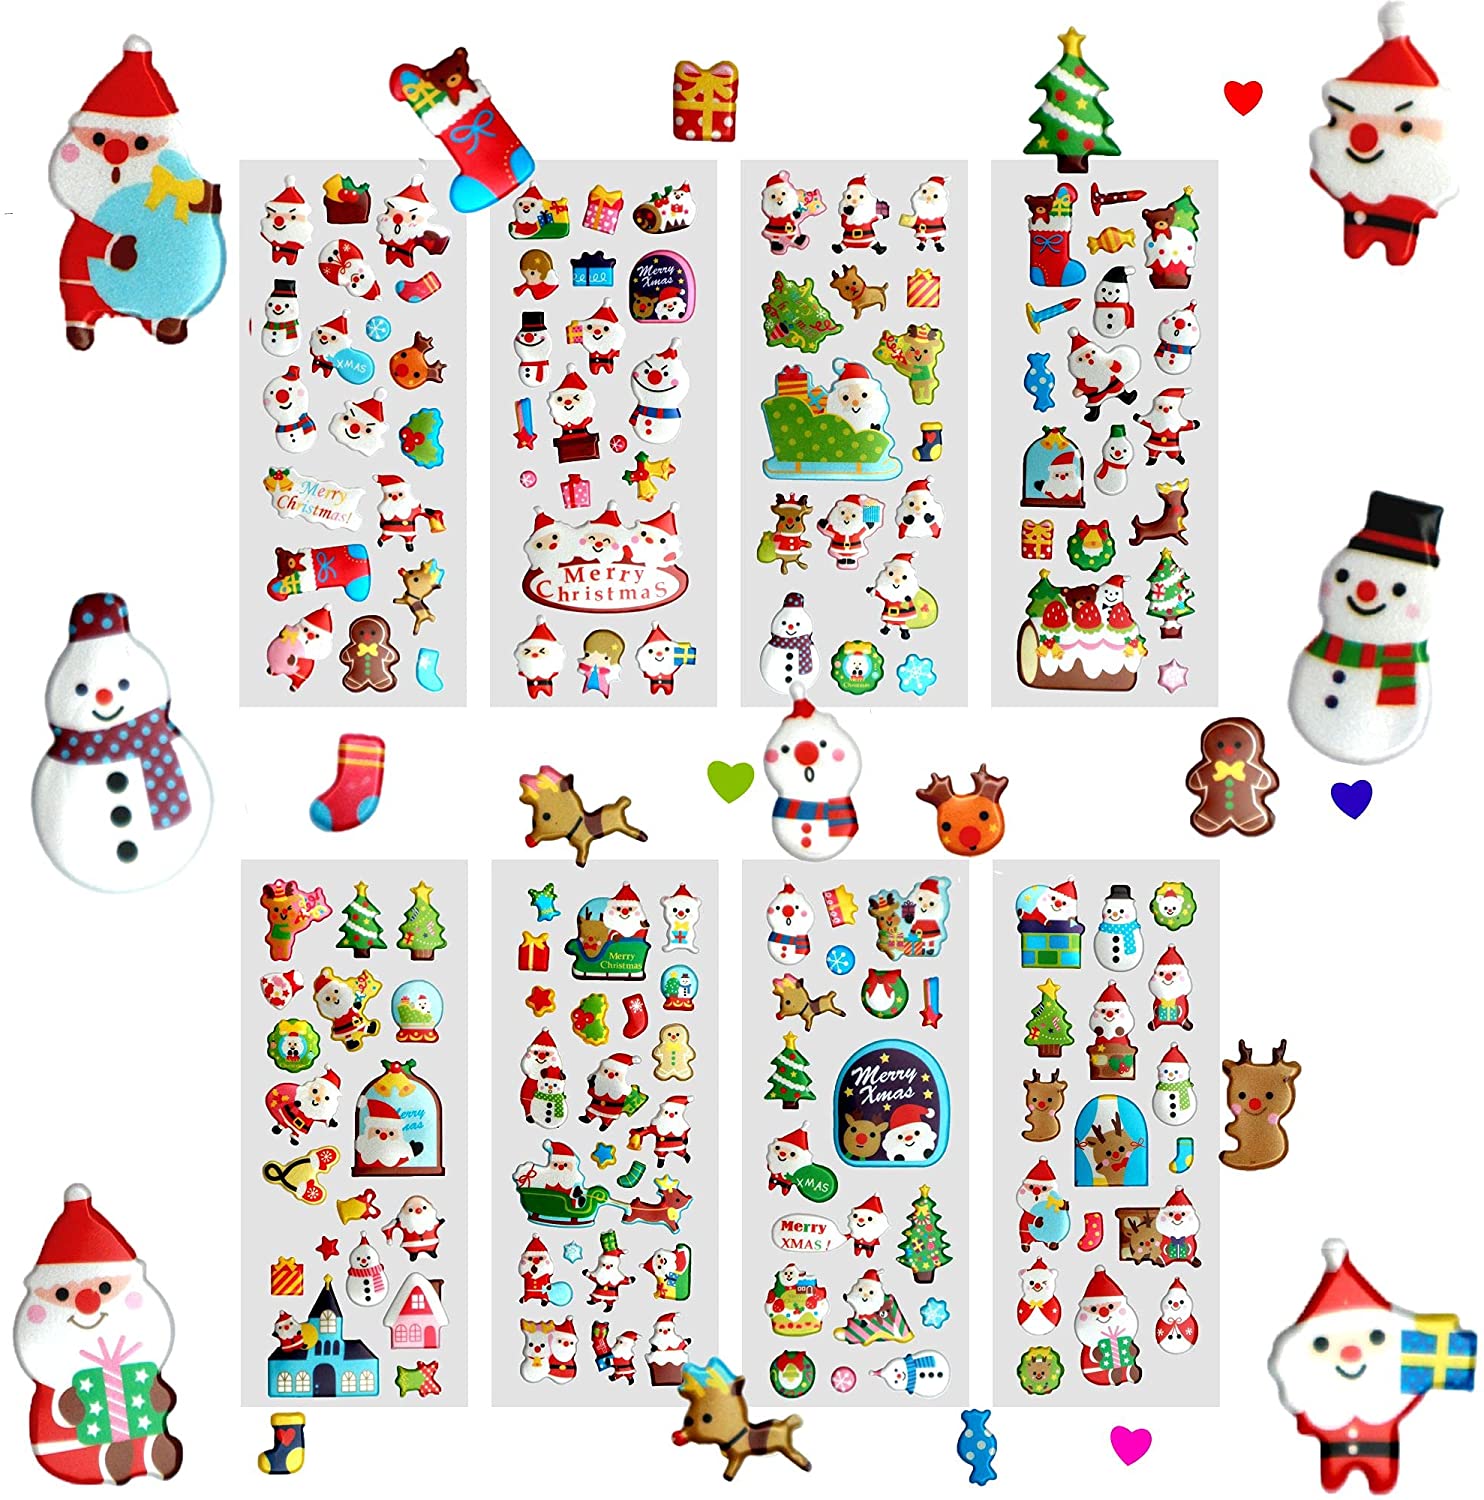 Creammuffin Professional Puffy Sticker Stickers Party Supplies Kits For Toddlers, Children 3D Puffy Christmas Stickers